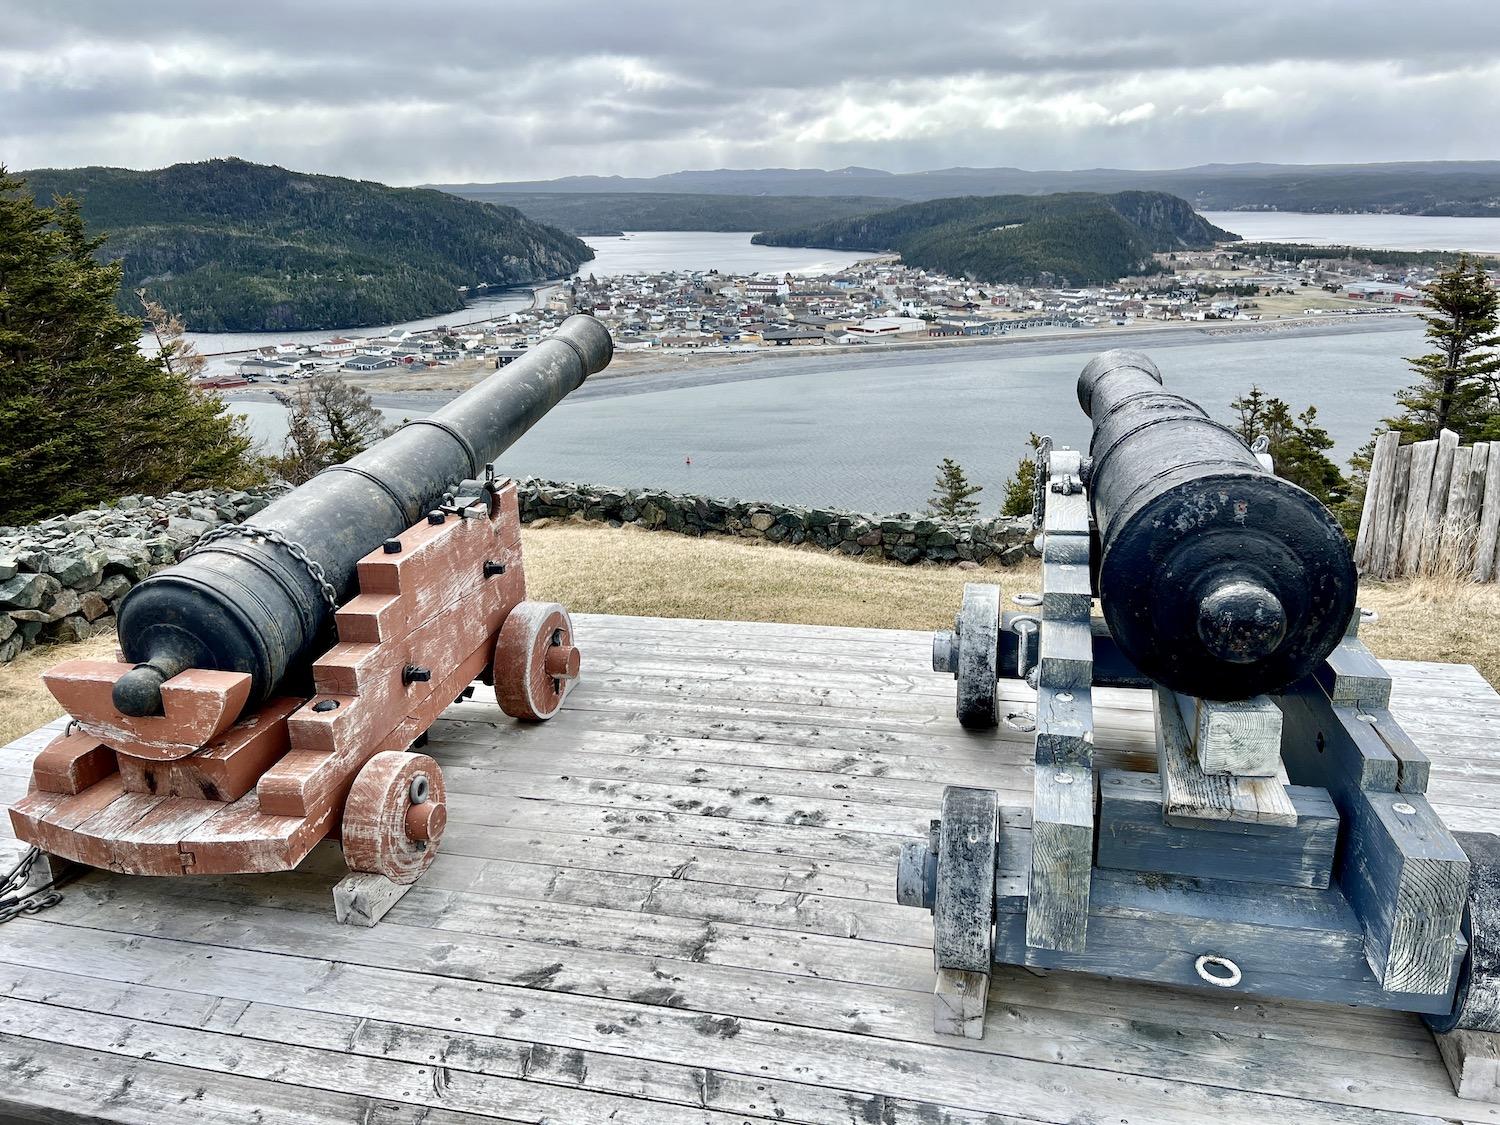 A view of modern-day Placentia through cannons at Castle Hill National Historic Site.